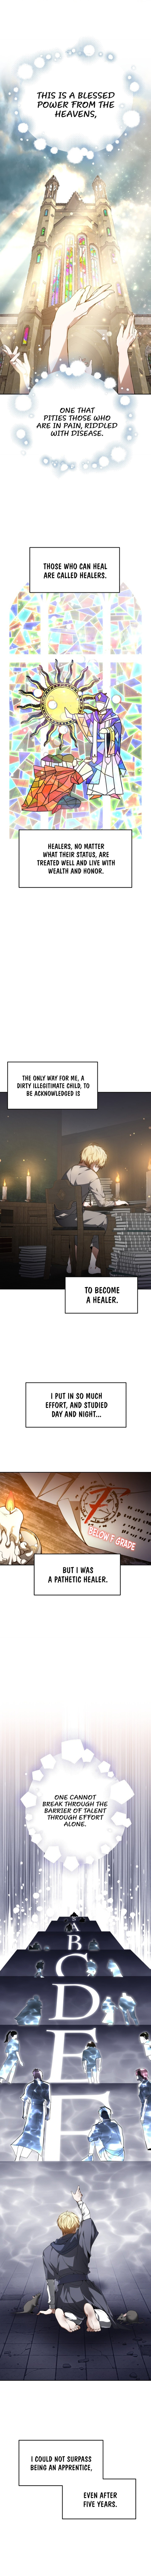 Dr. Player - Chapter 1 Page 4